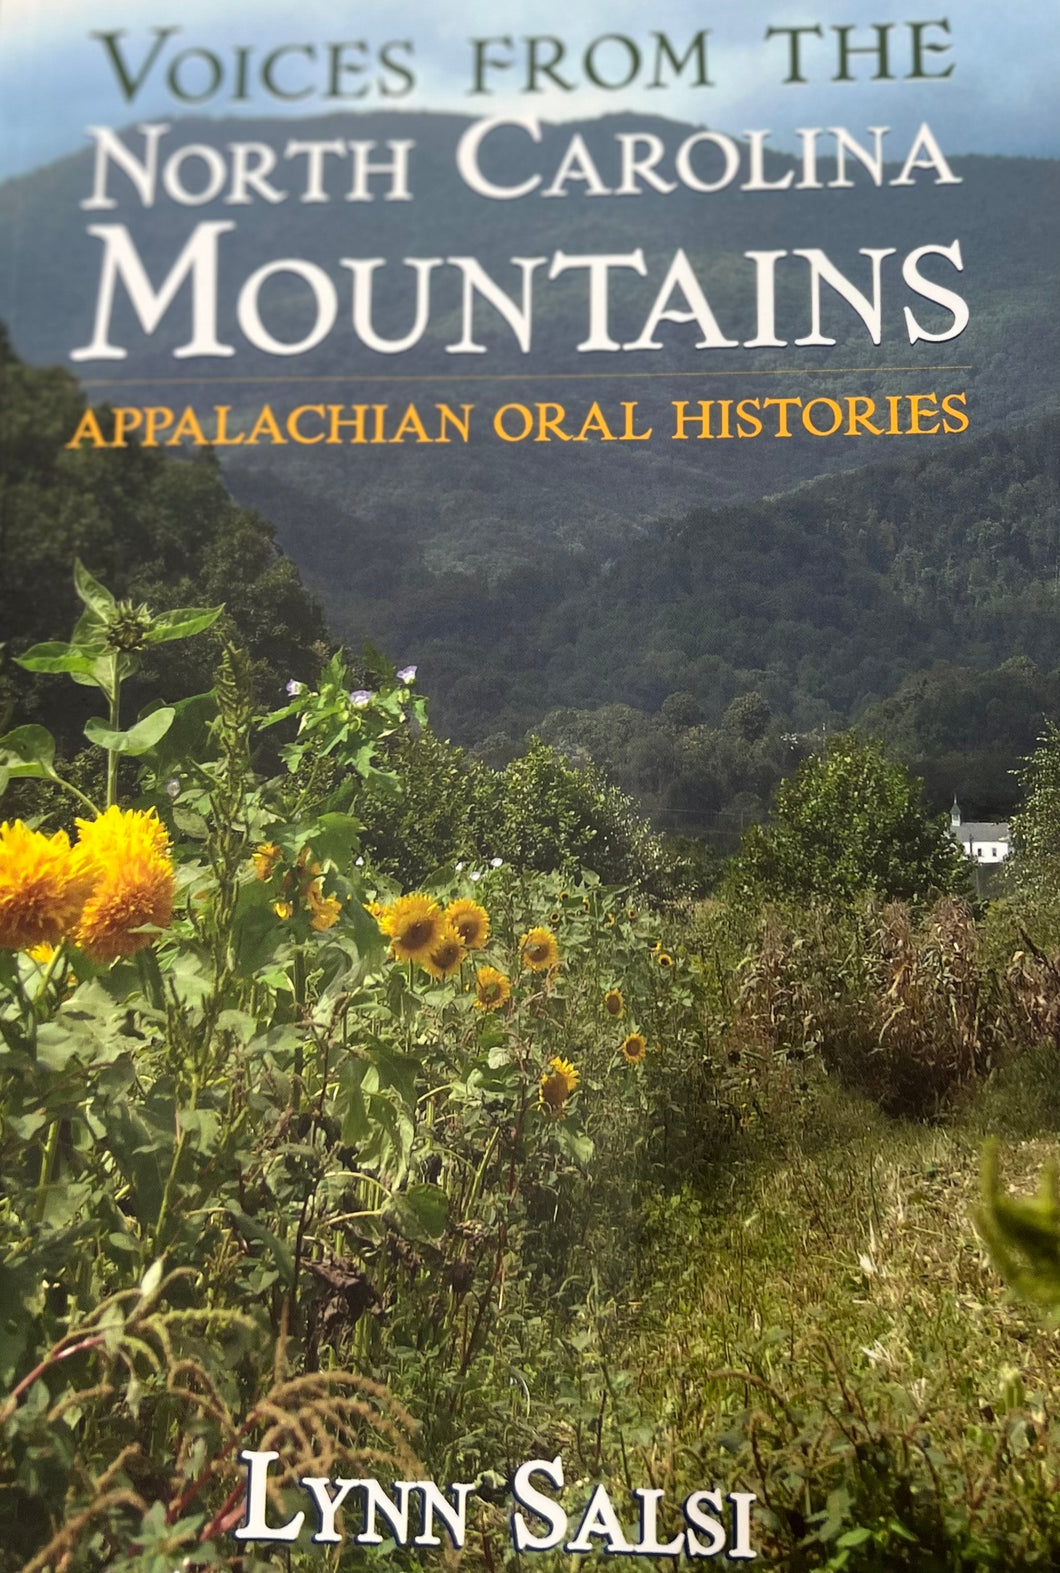 Voices From the NC Mountains Appalachian